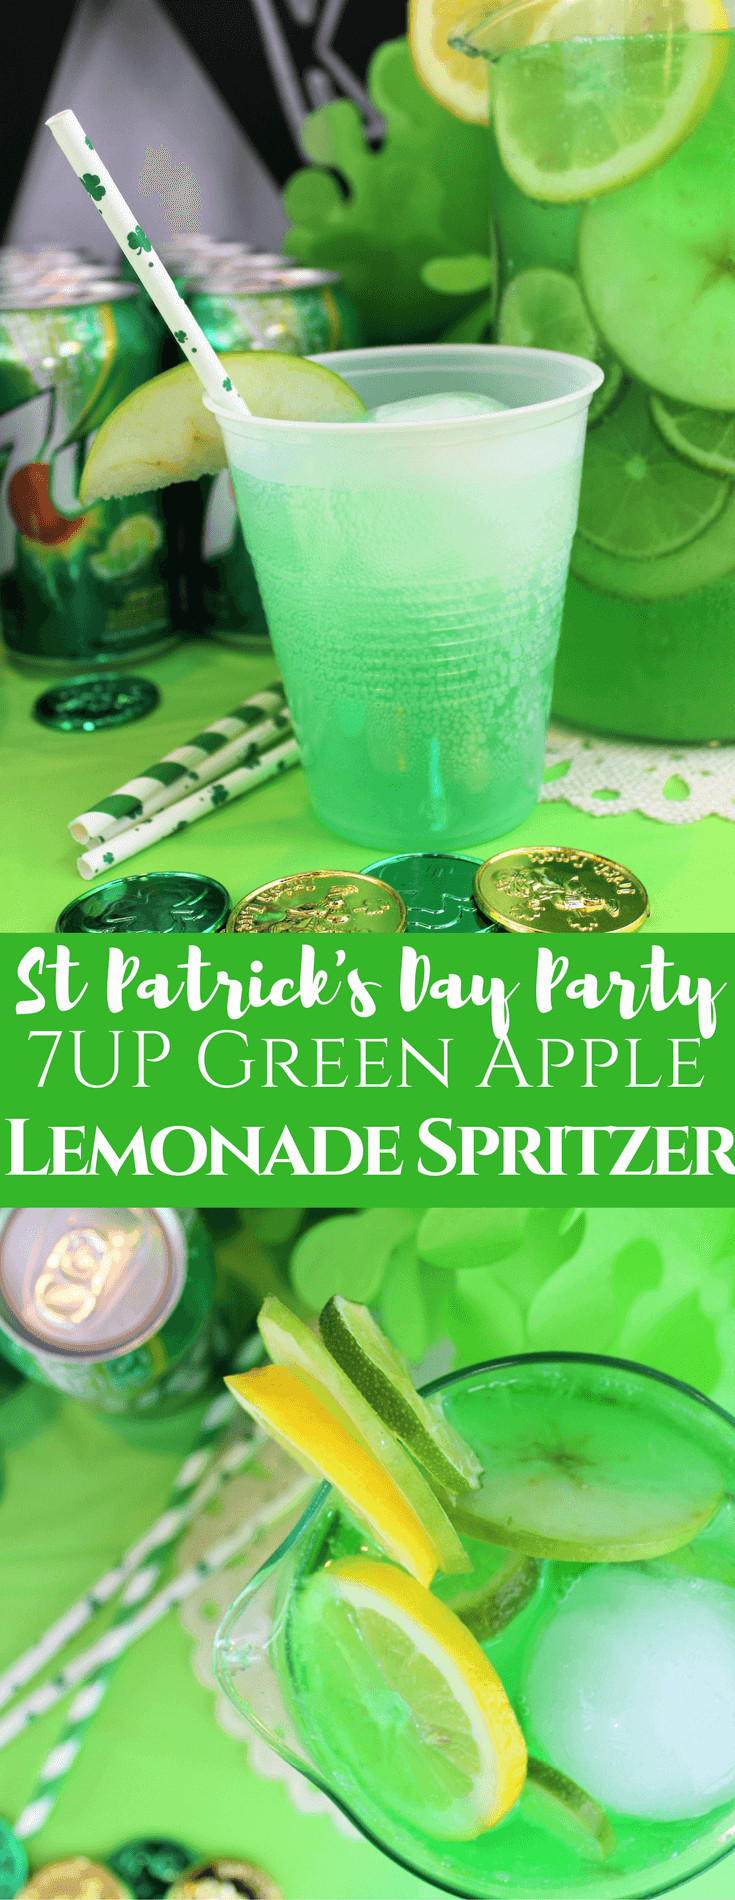 Recipes For St Patrick's Day Party
 St Patrick s Day Party Recipes